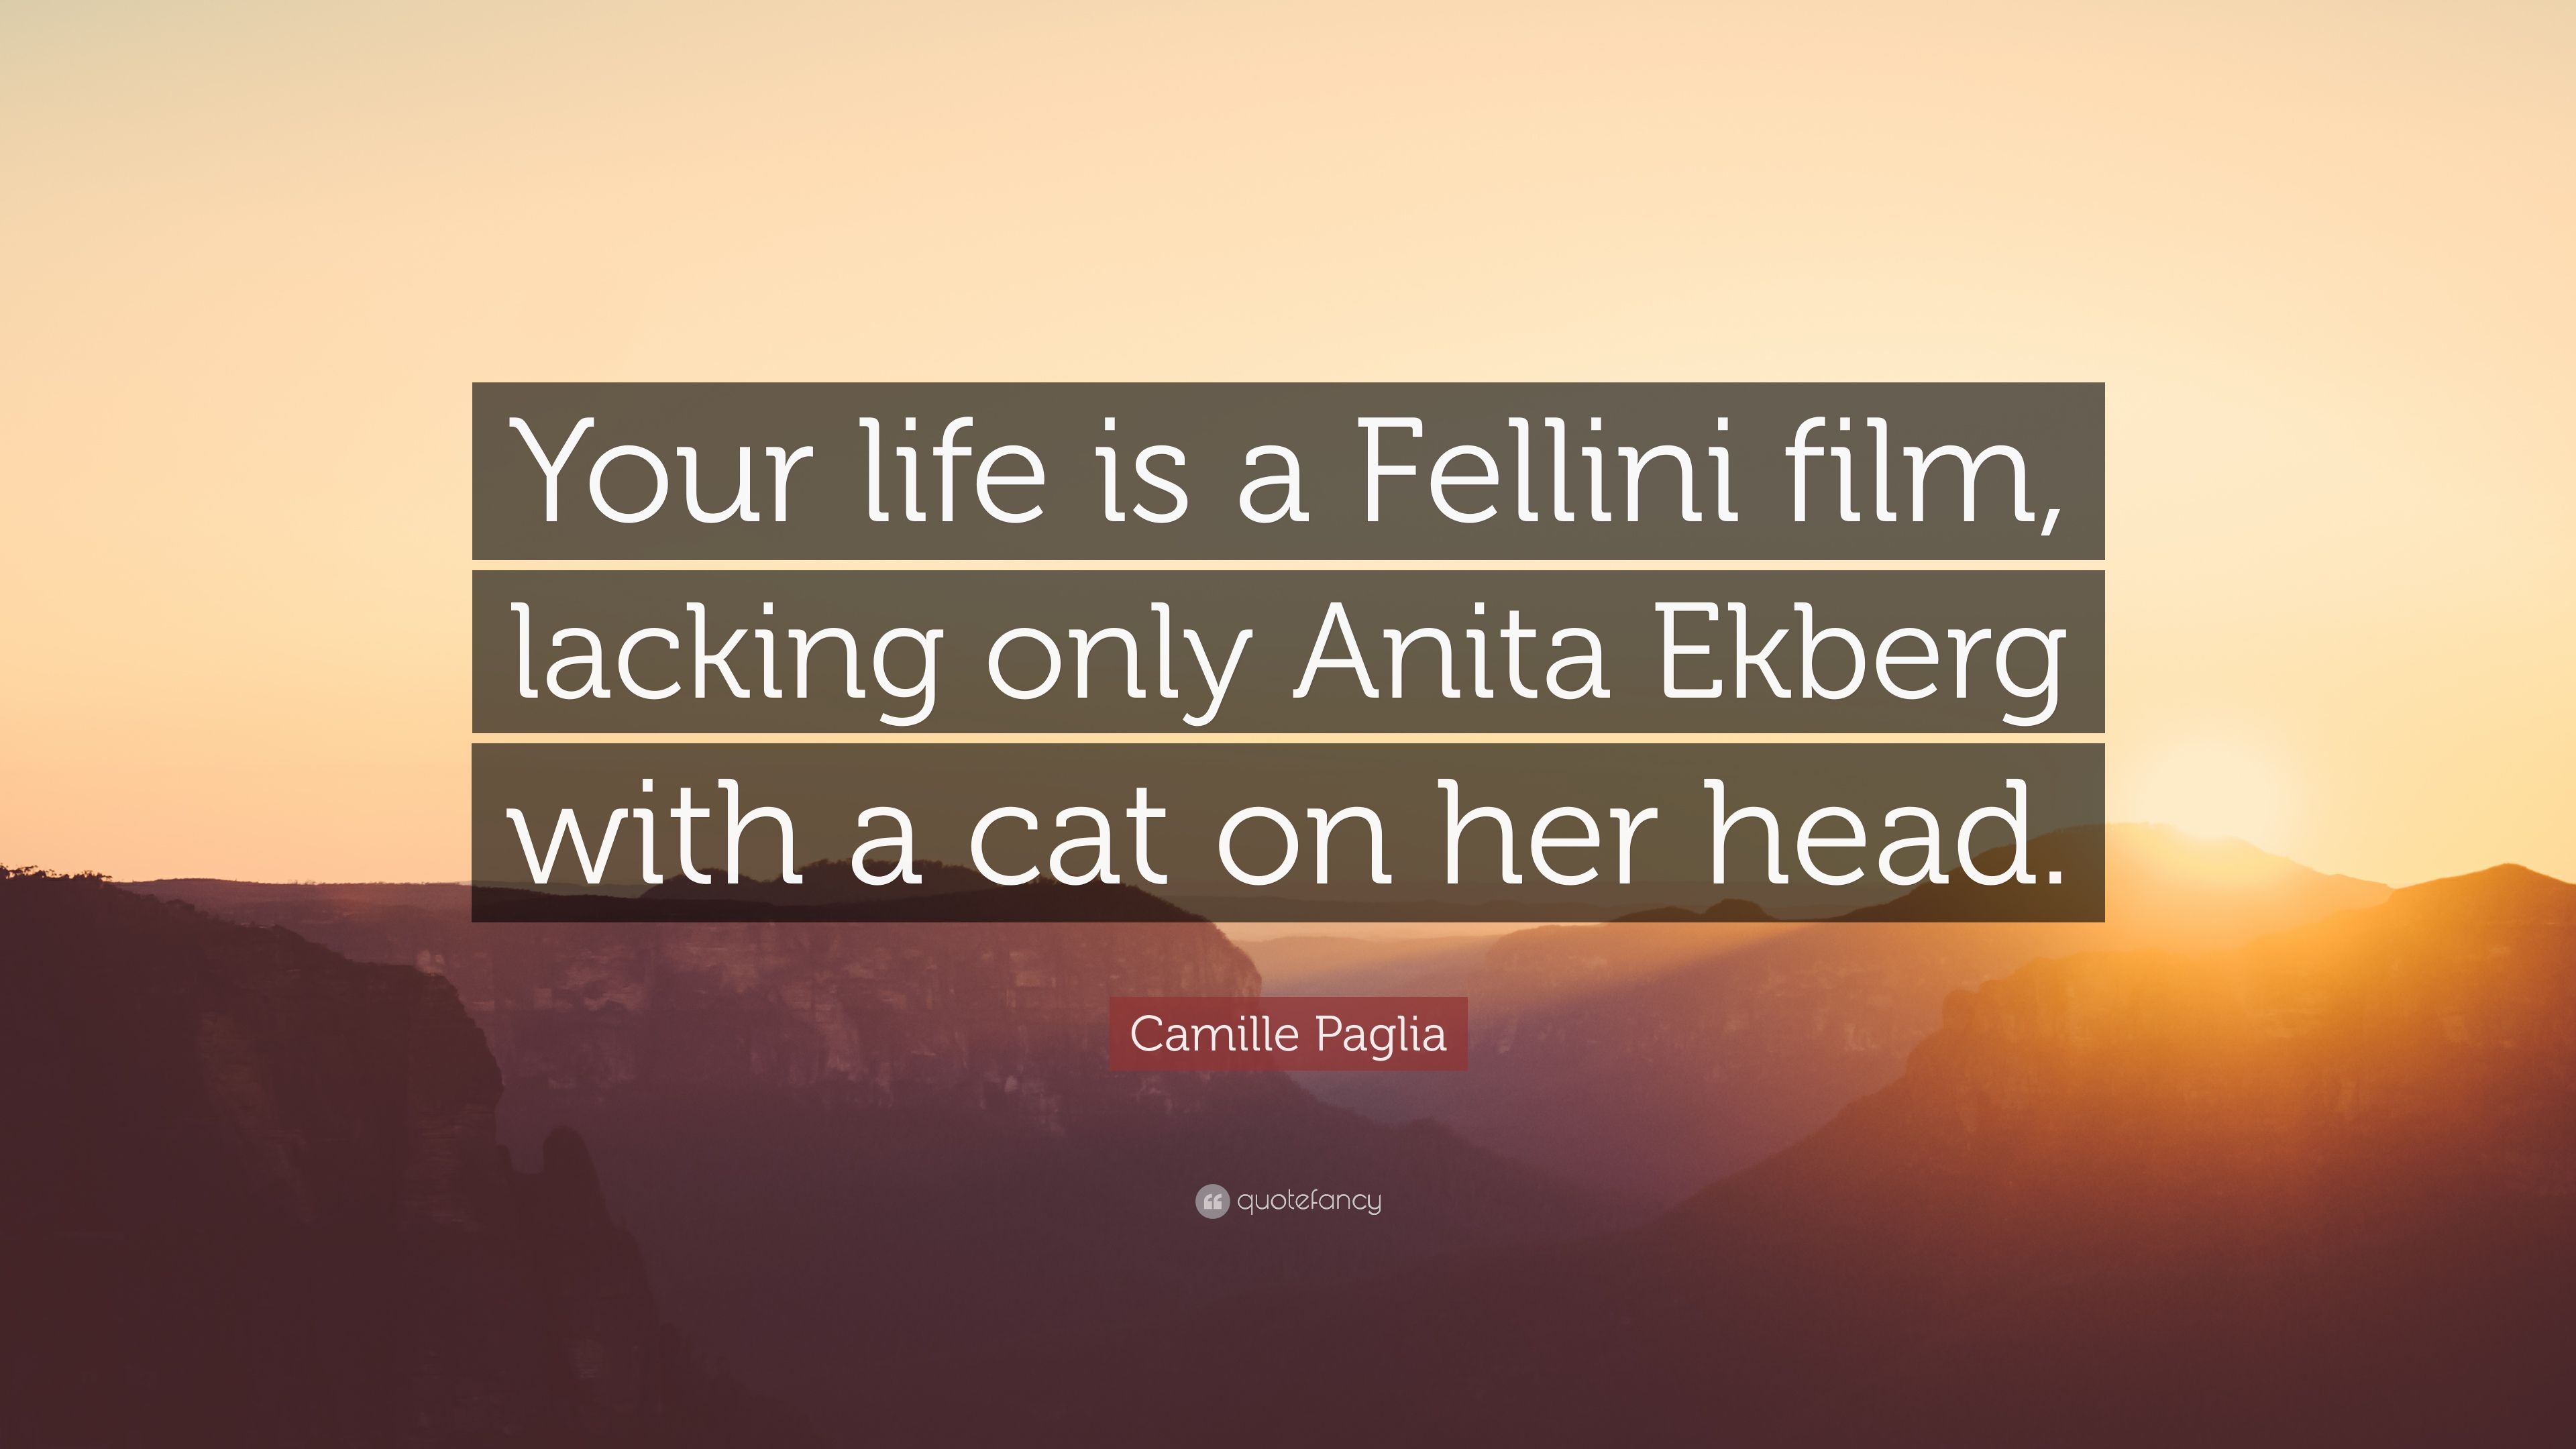 Camille Paglia Quote: “Your life is a Fellini film, lacking only